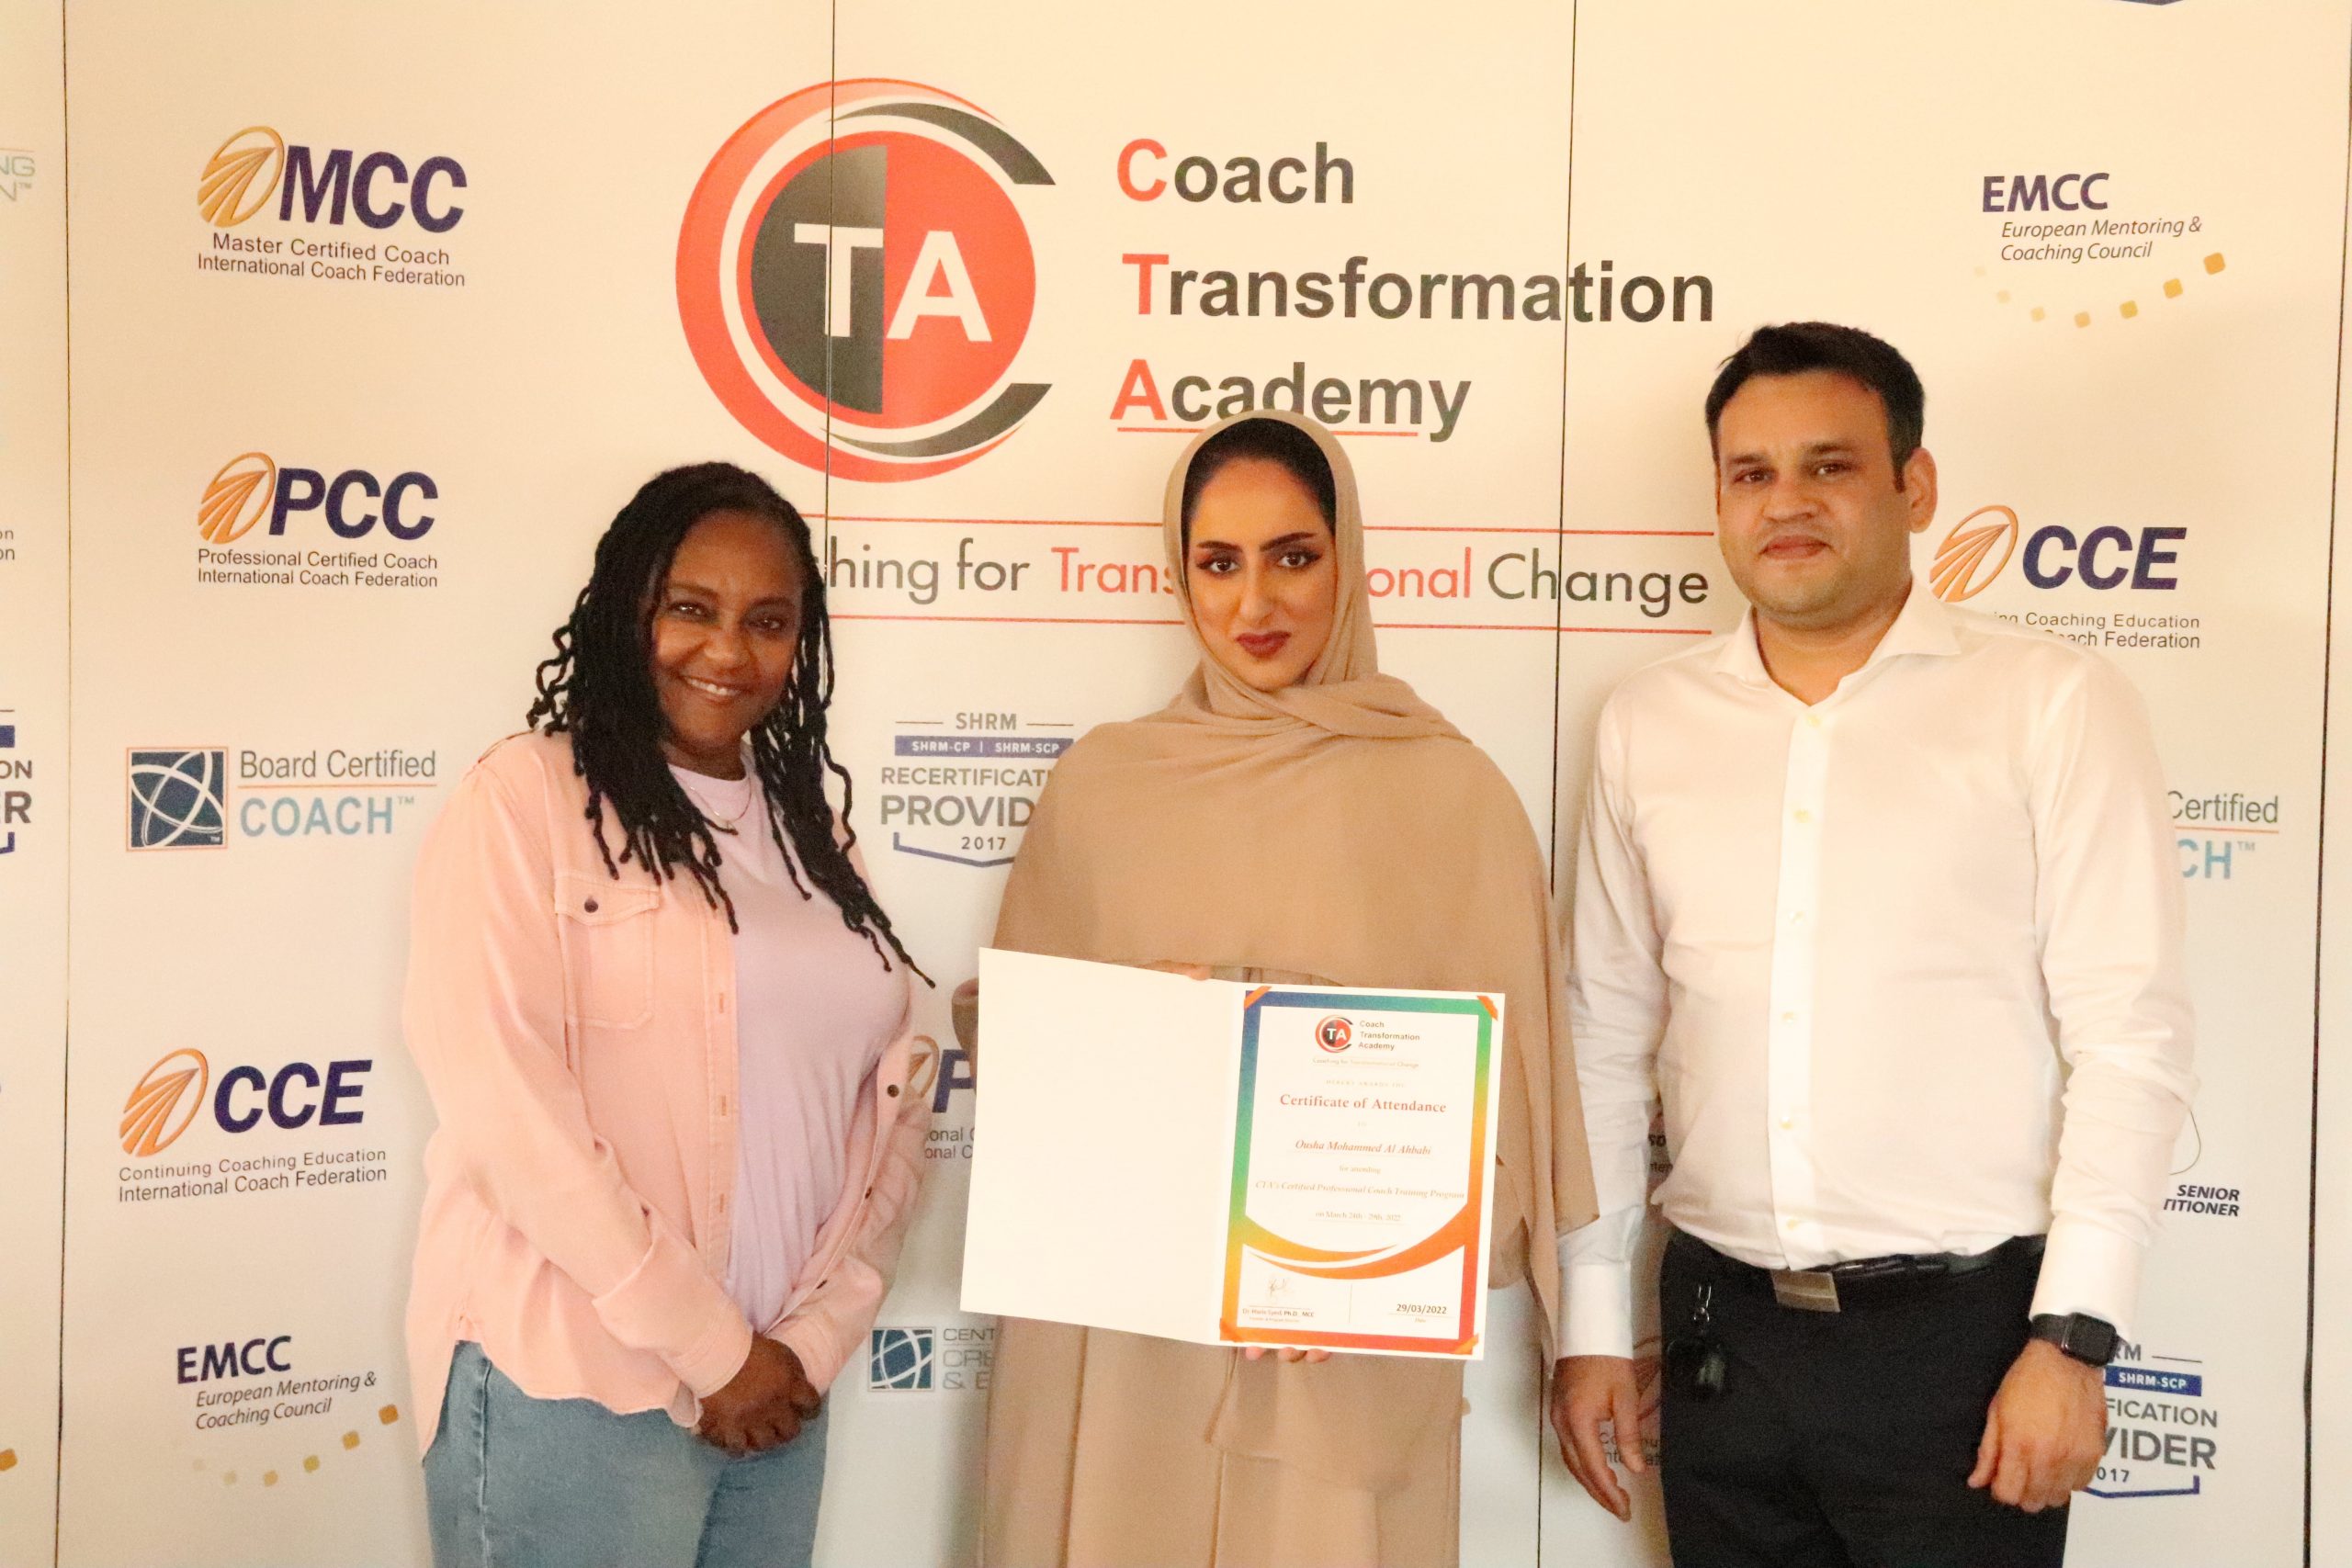 ICF Accredited Coach Certification Program